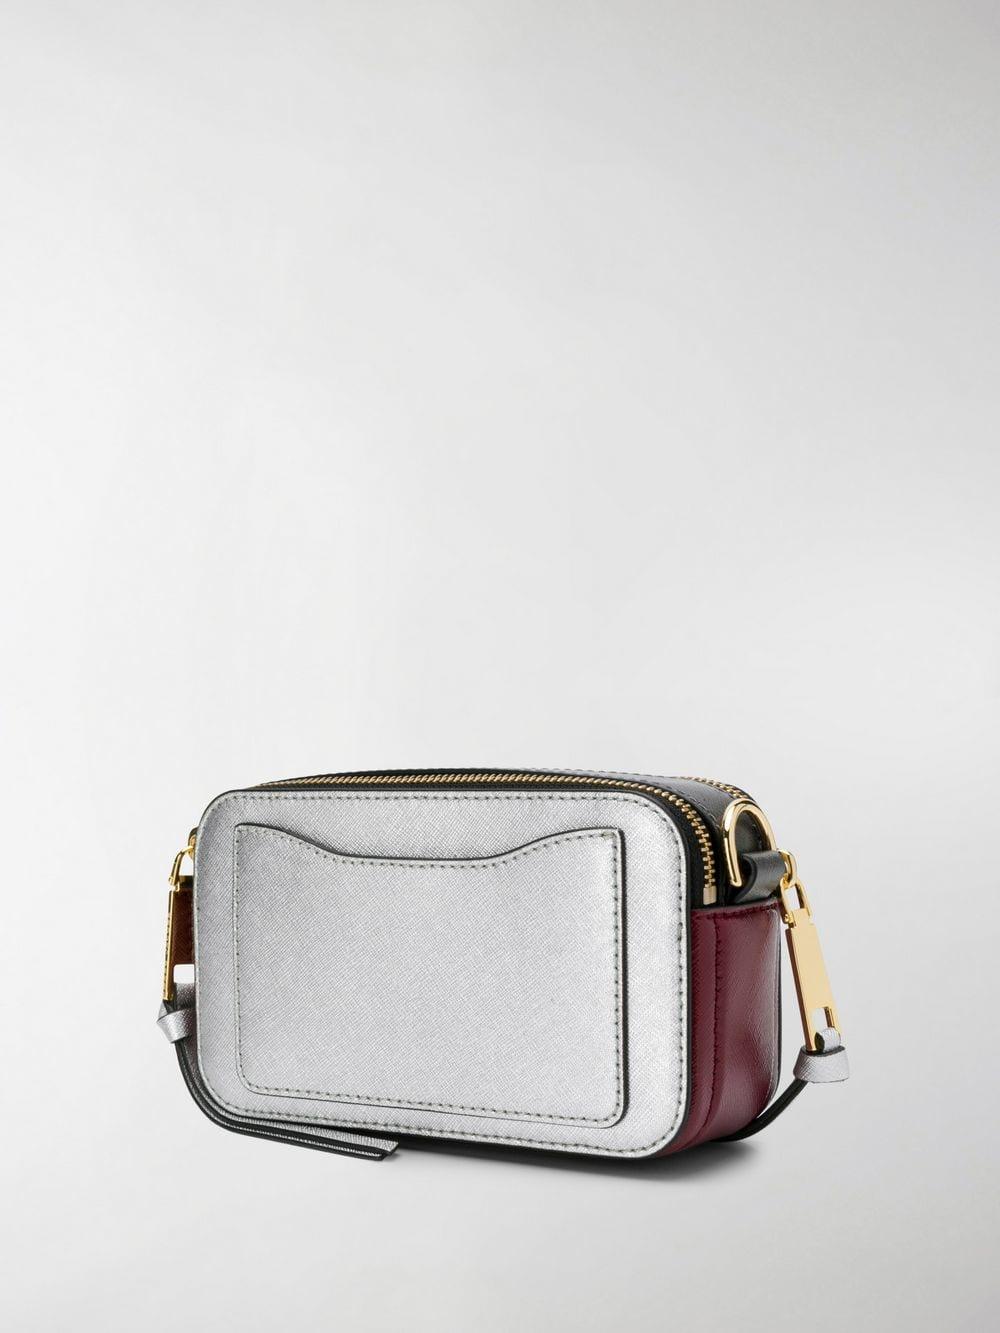 Marc Jacobs Snapshot Small Camera Bag in Metallic - Lyst